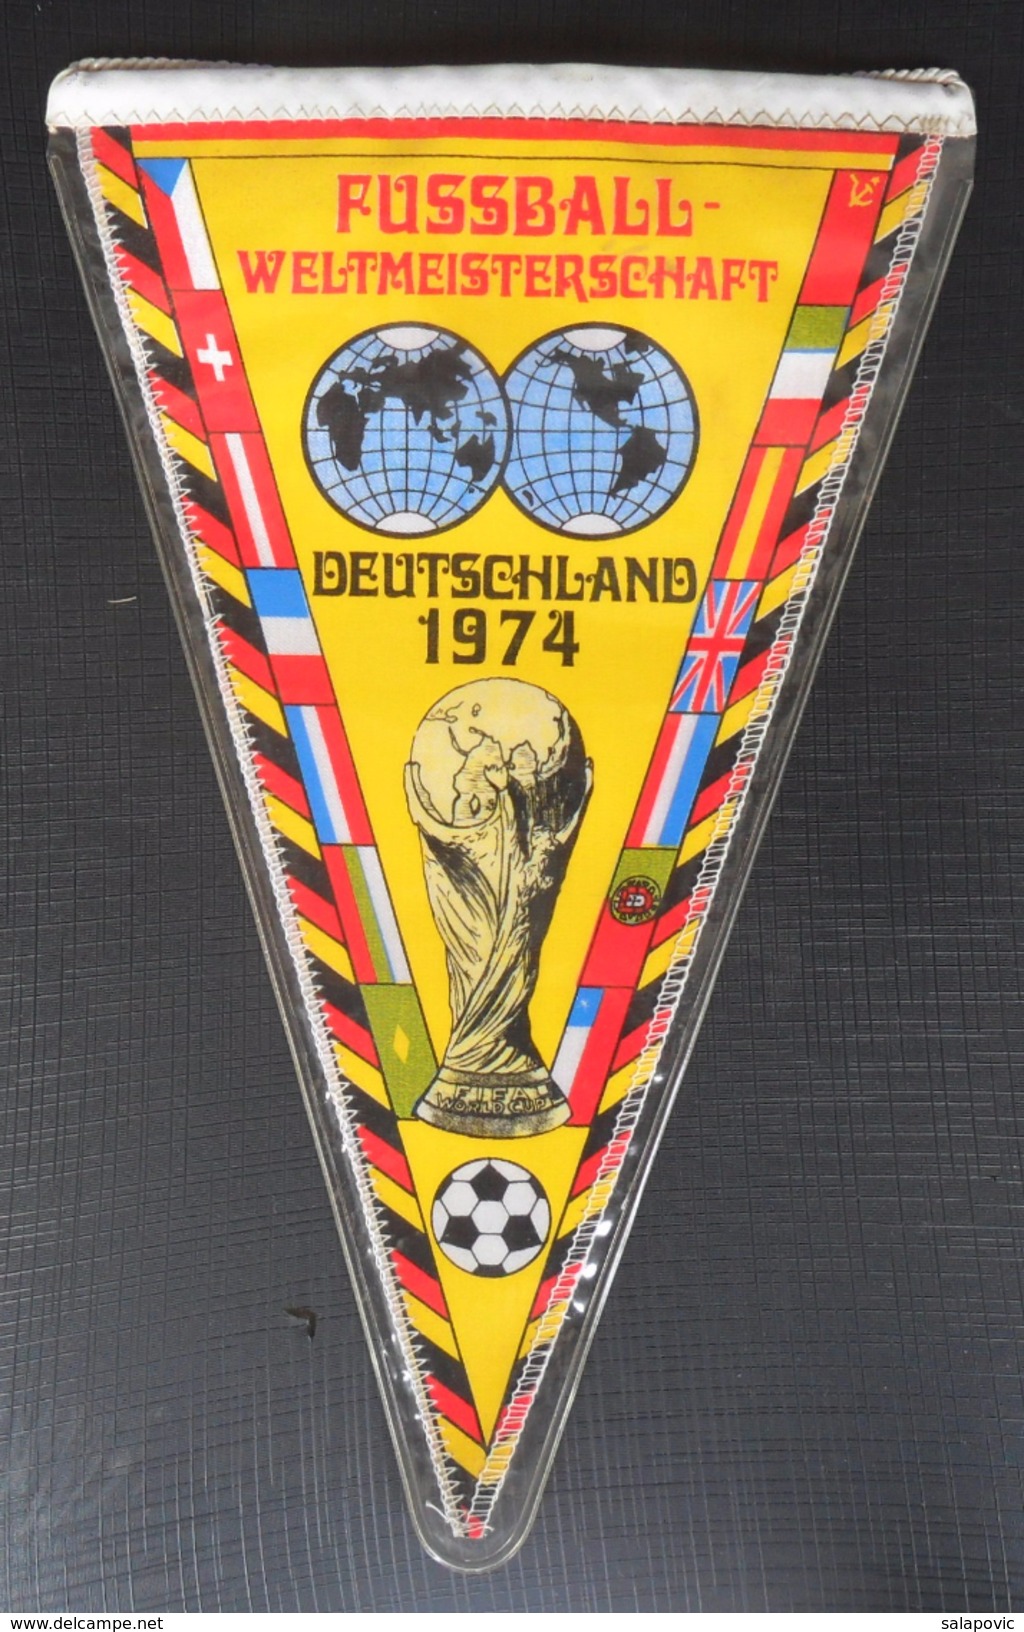 FIFA World Cup 1974 DEUTSCHLAND, GERMANY FOOTBALL CLUB CALCIO OLD PENNANT - Kleding, Souvenirs & Andere